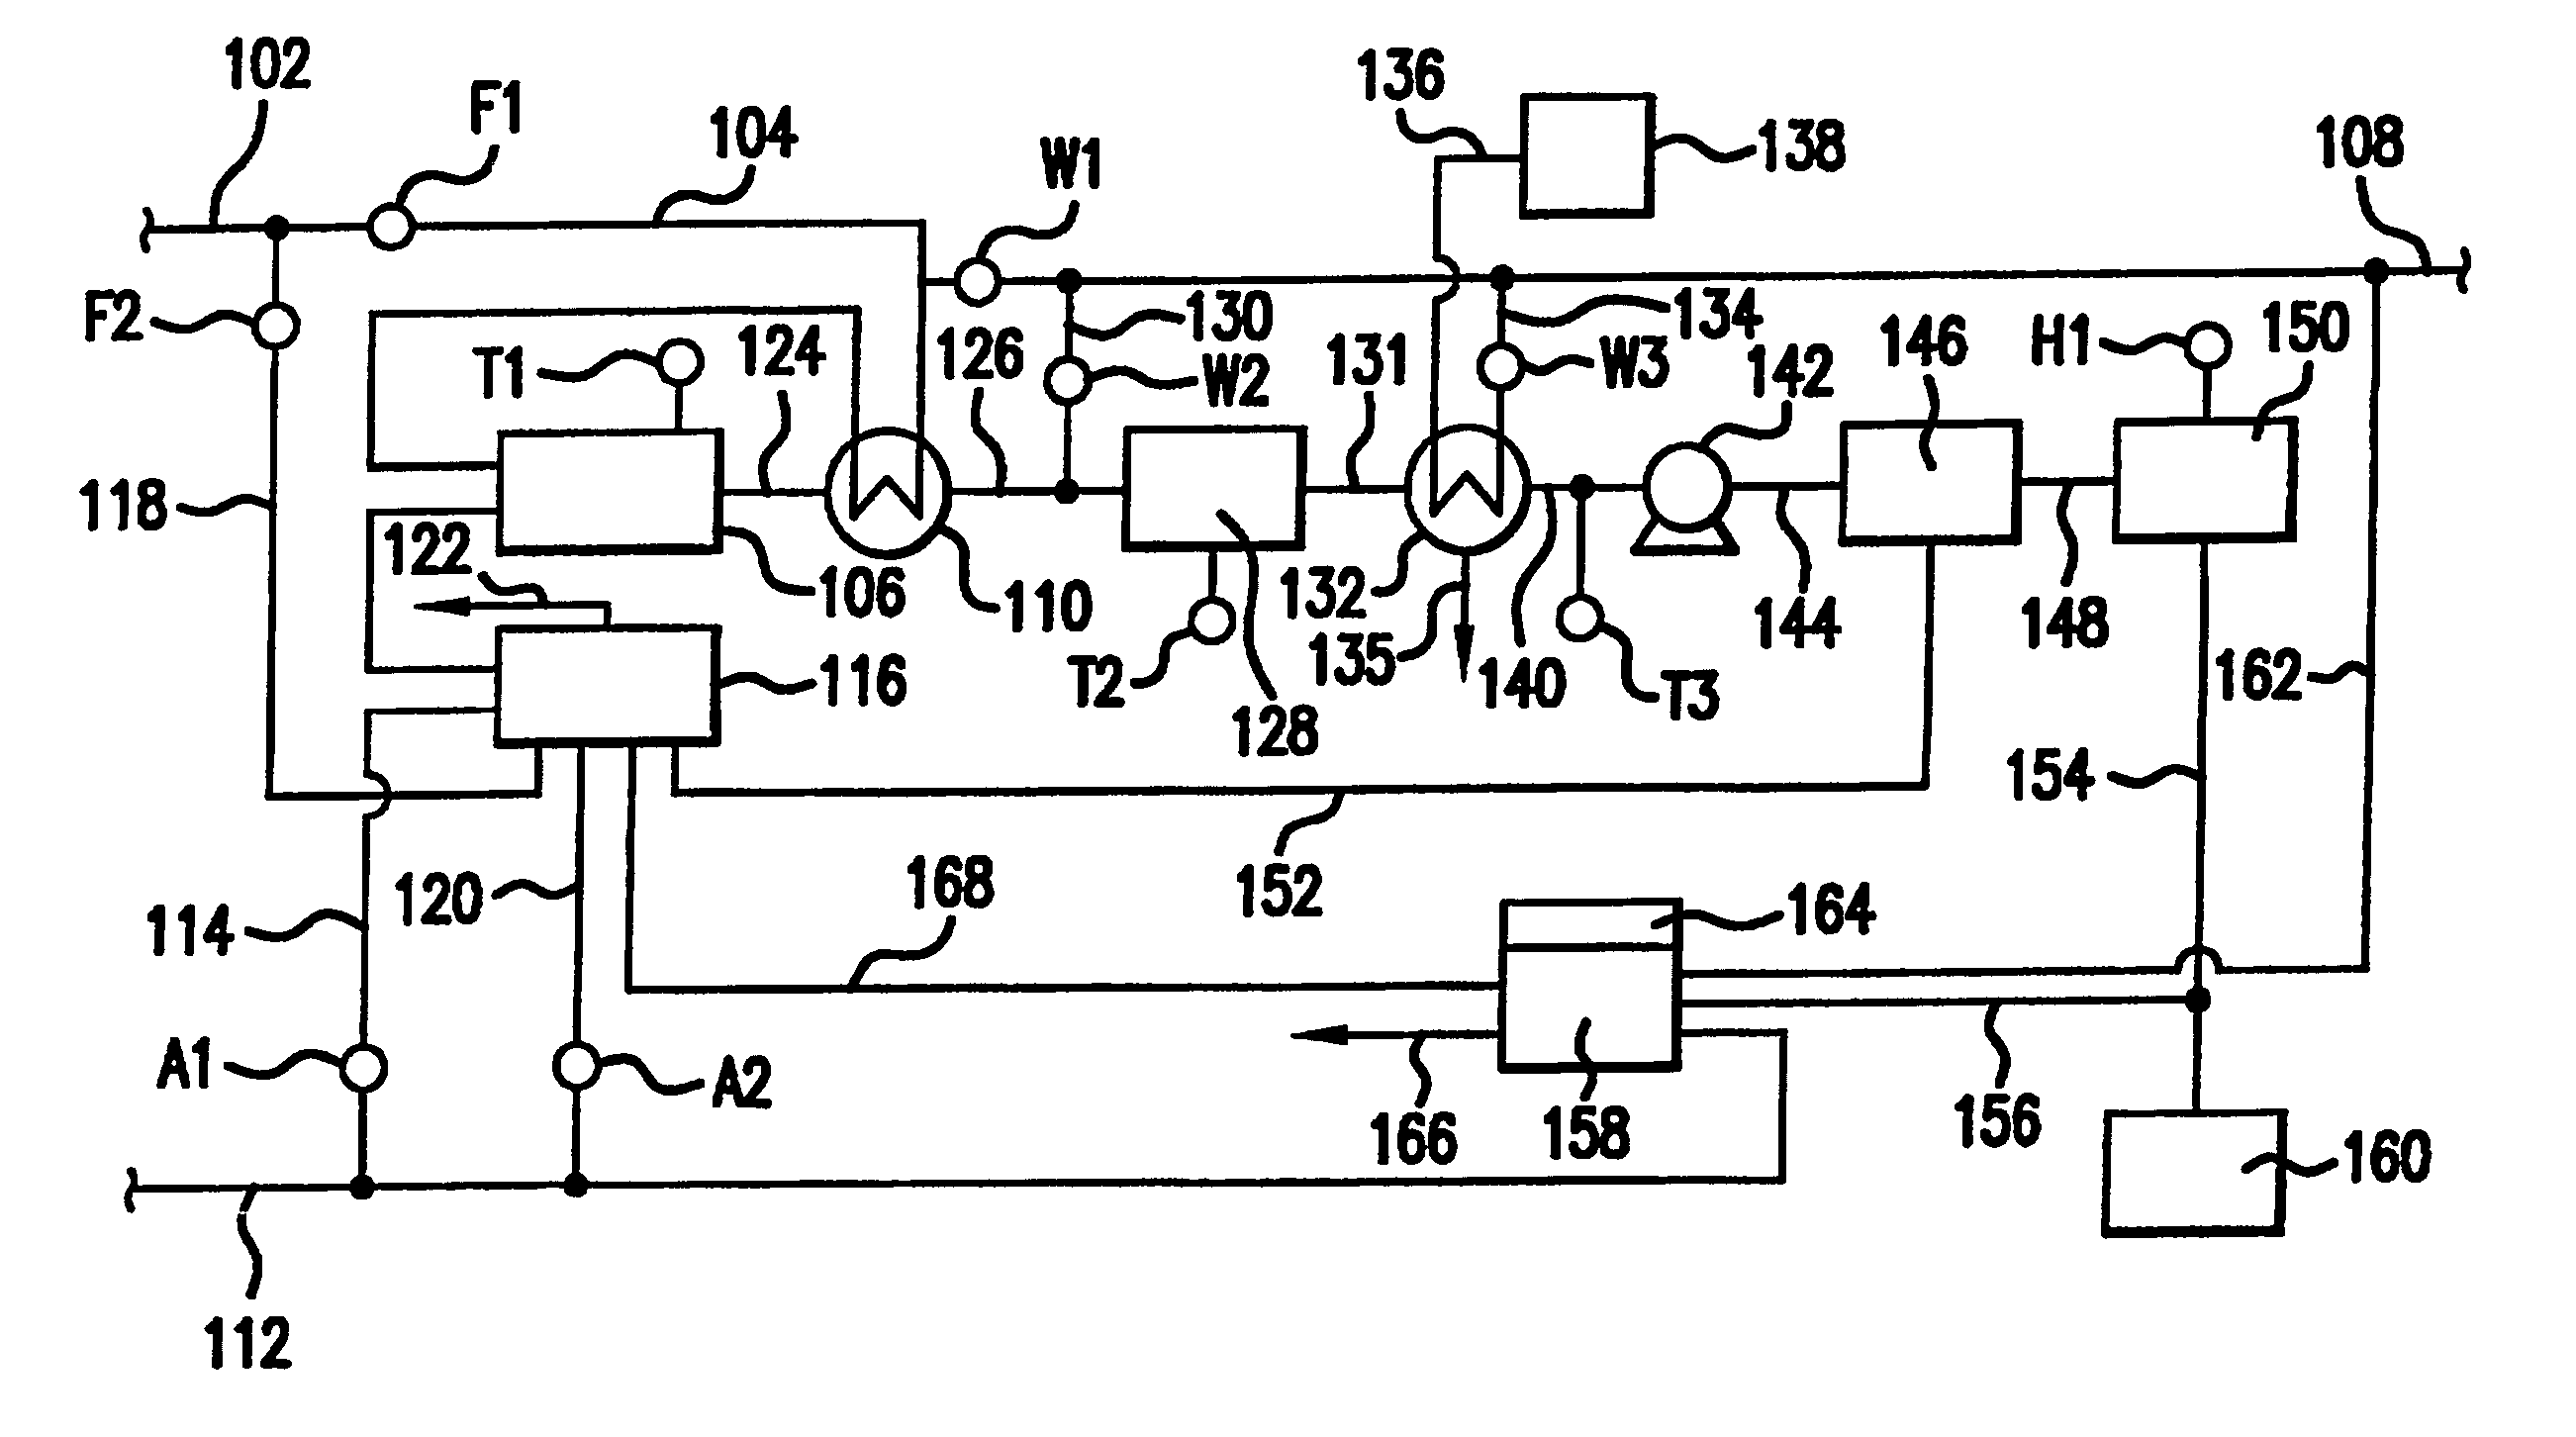 Method for operating a hydrogen generator